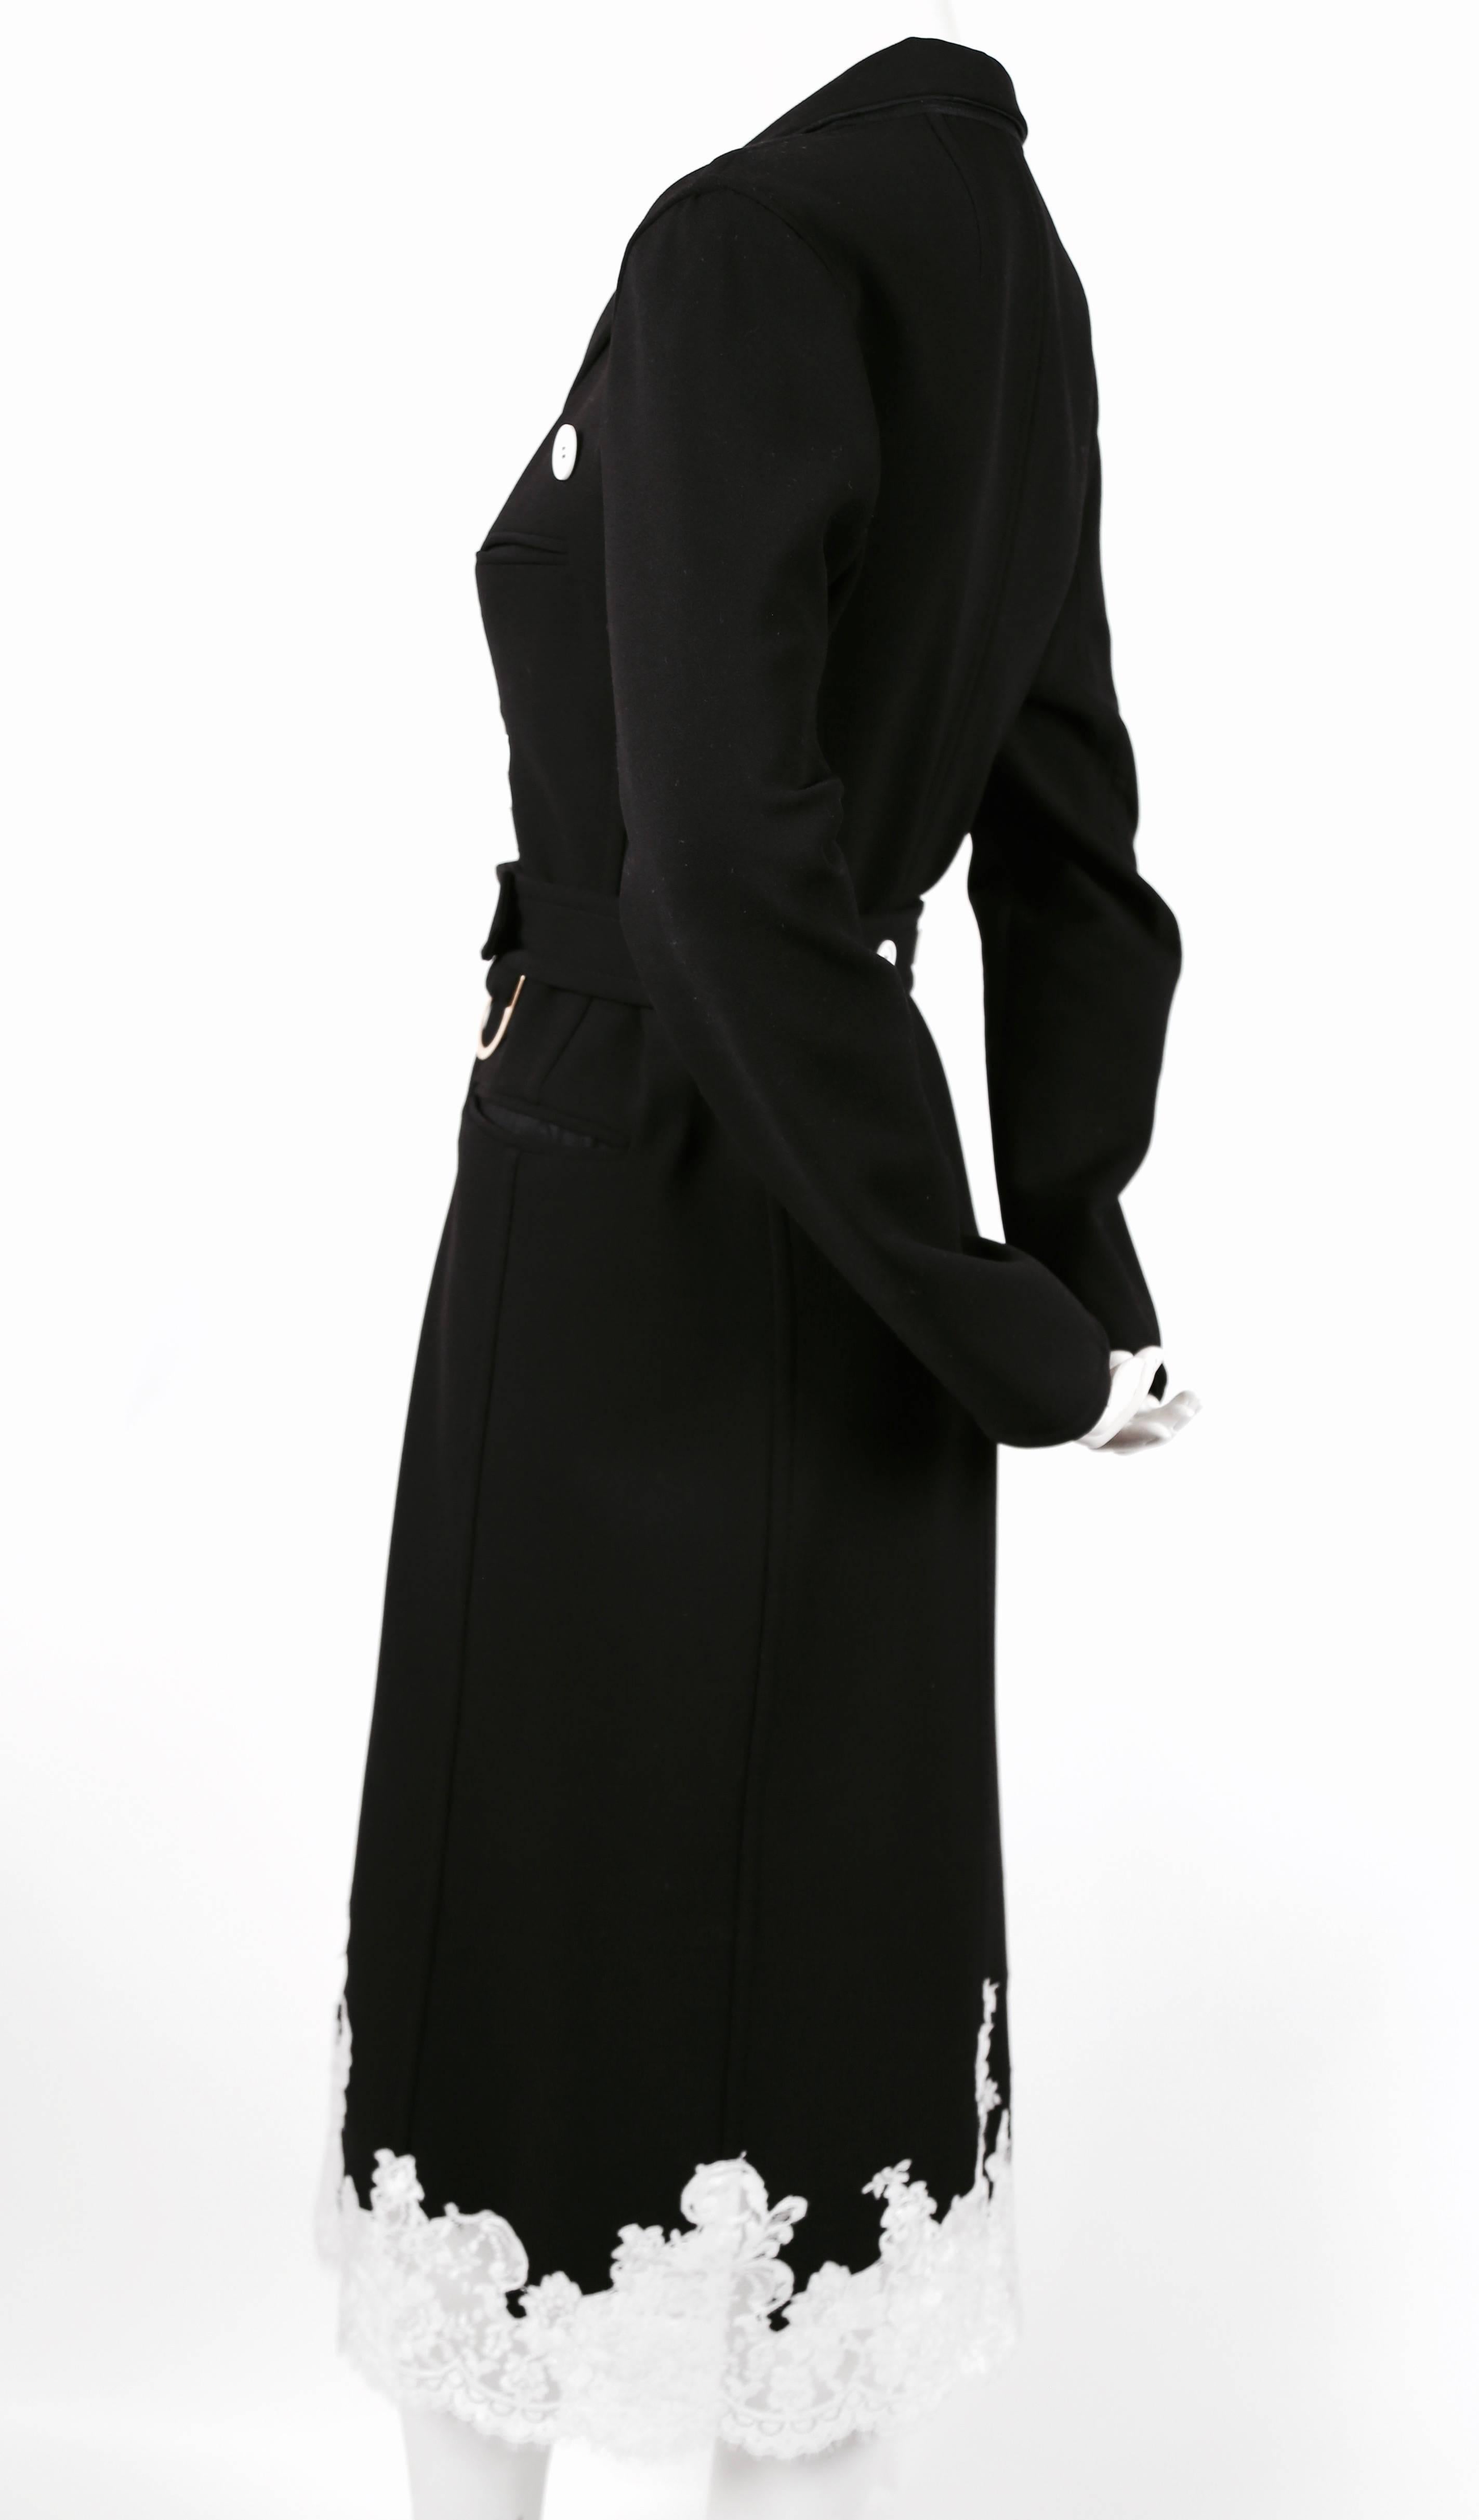 Black stretch wool trench with white lace trim designed by Phoebe Philo for Celine exactly as seen on the spring 2016 runway. French size 38. Approximate measurements: shoulder 17", bust 36", waist 33" without belt and 30" with